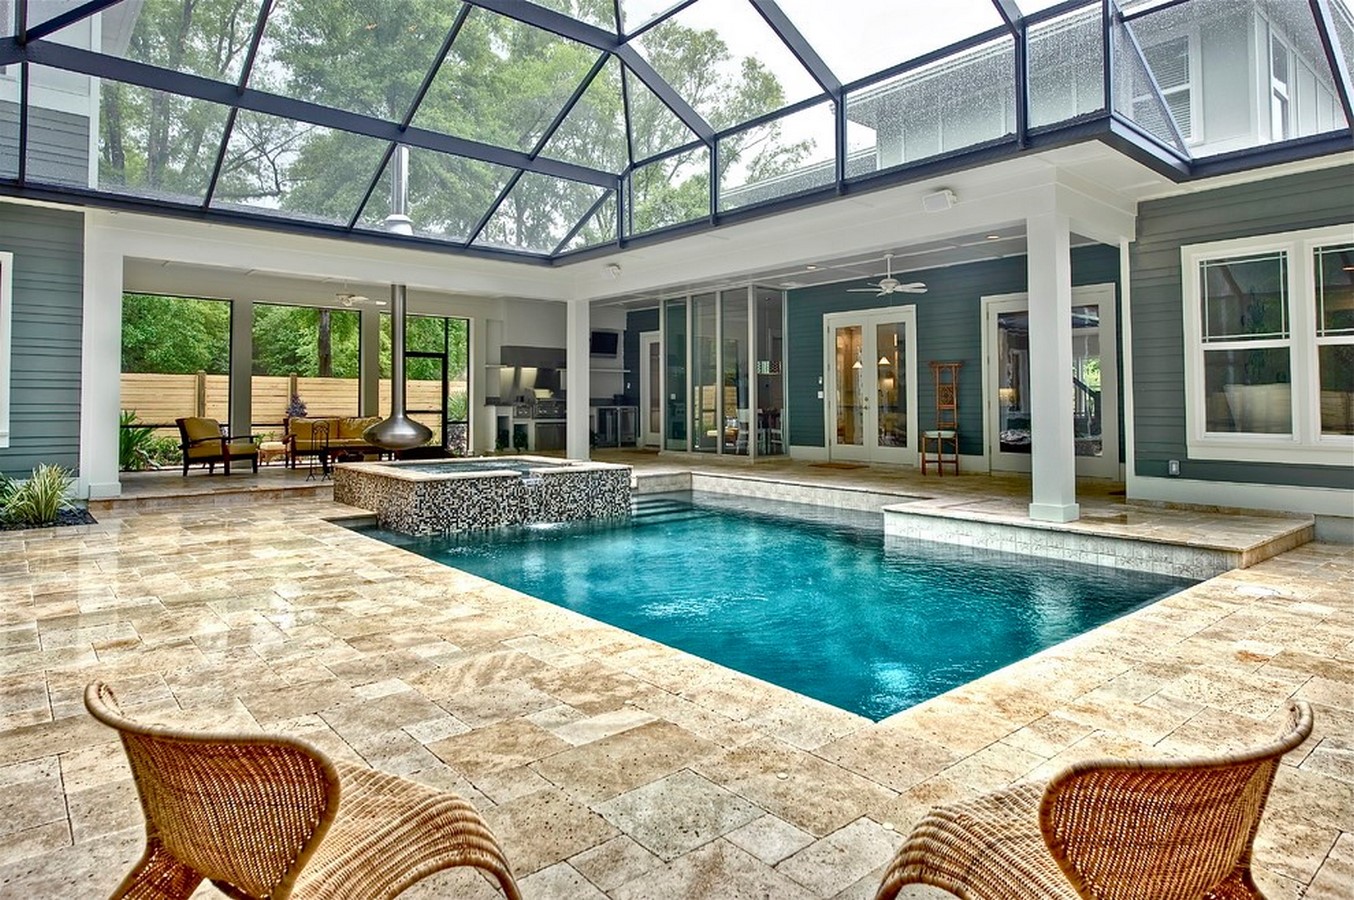 50 Pool designs for your home